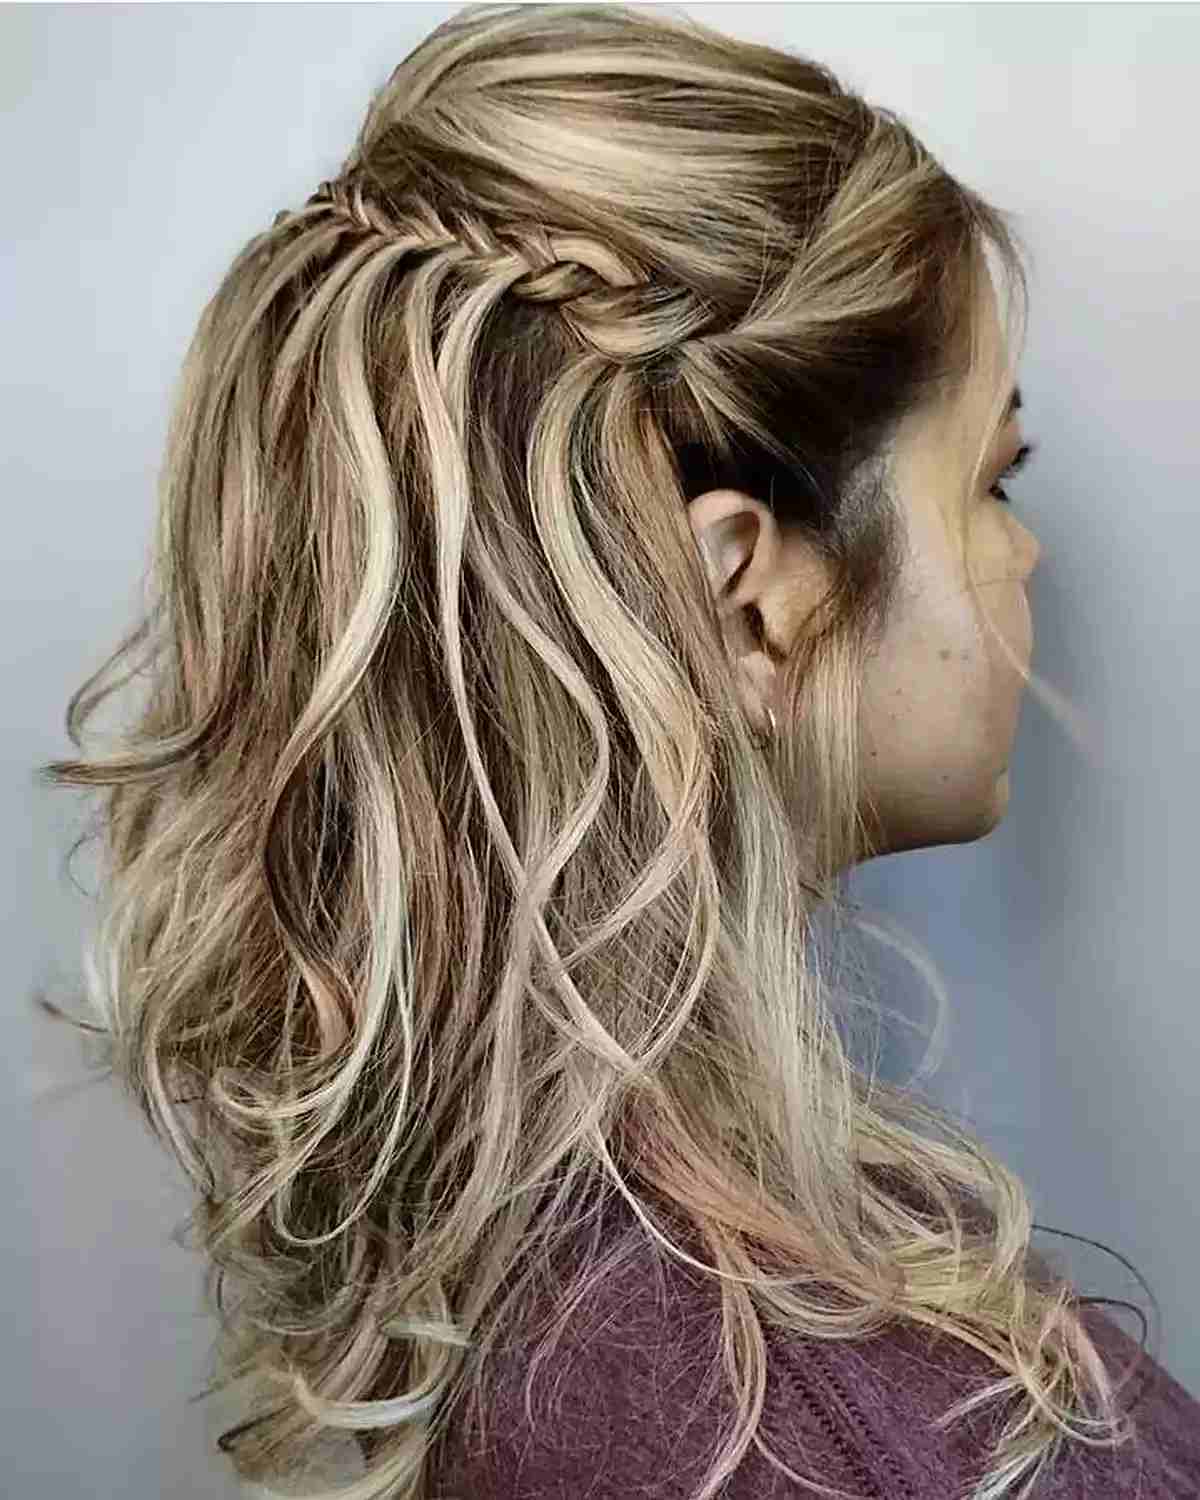 Graduation Messy Braided Half Updo for Mid-Length Dimensional Bronde Hair